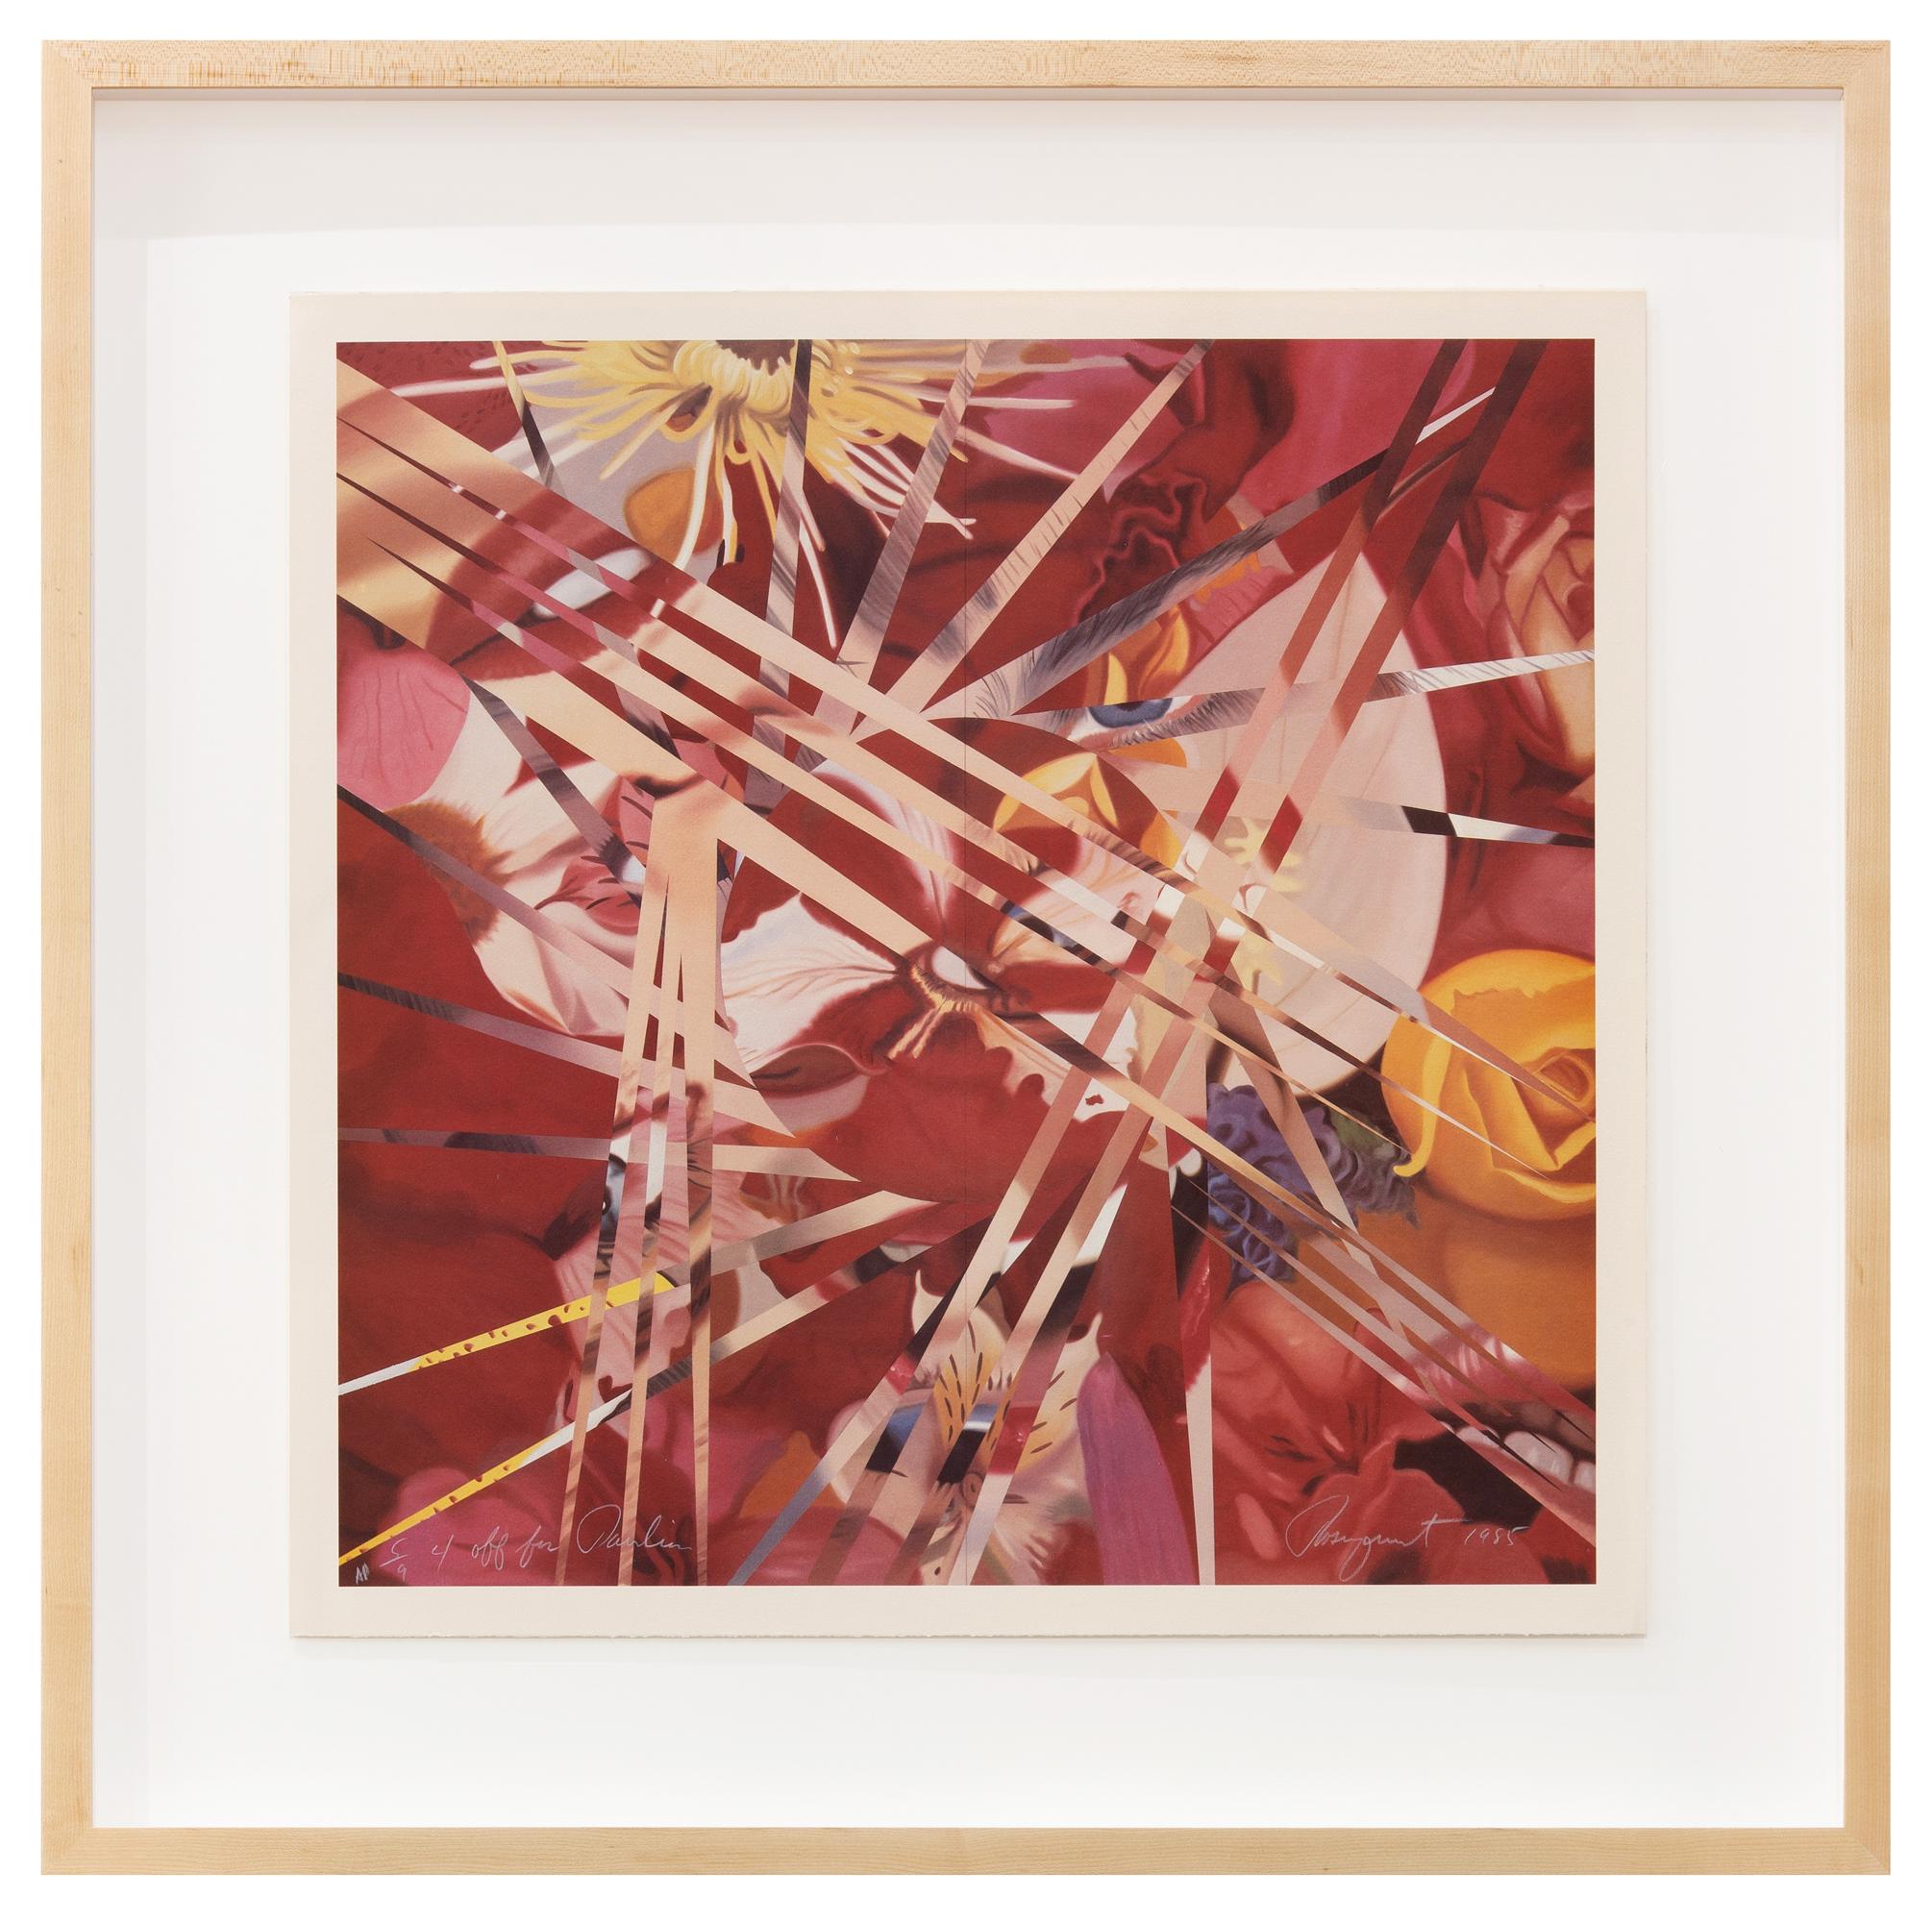 4 Off for Pavilion - Print by James Rosenquist